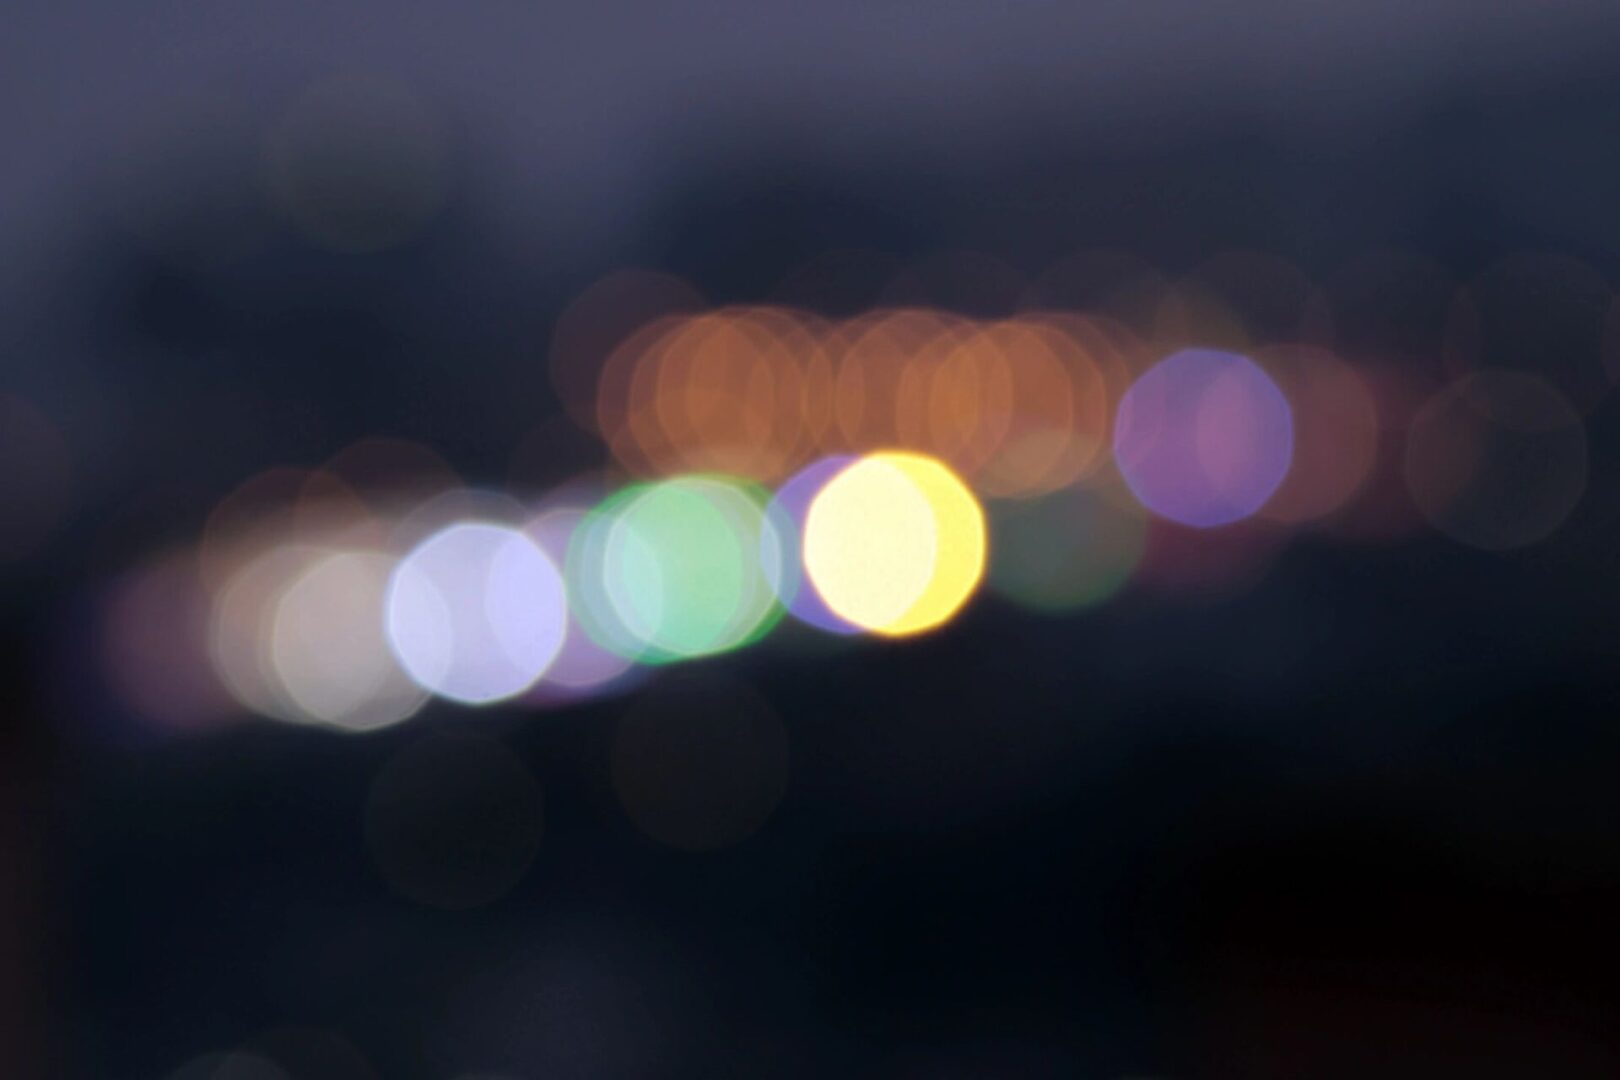 A blurry image of lights in the dark.